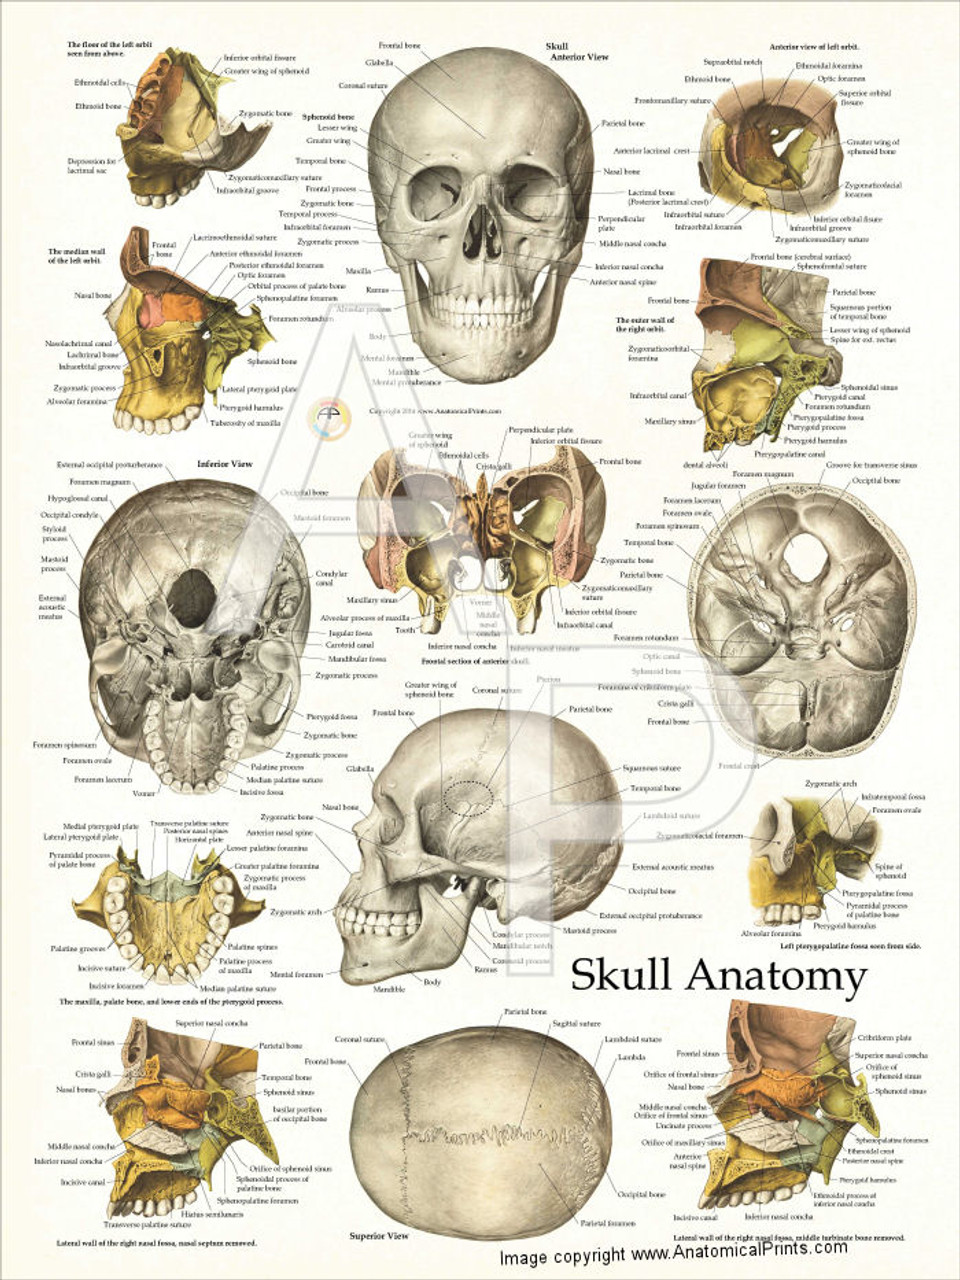 Skull Anatomy and Facial Structures Poster